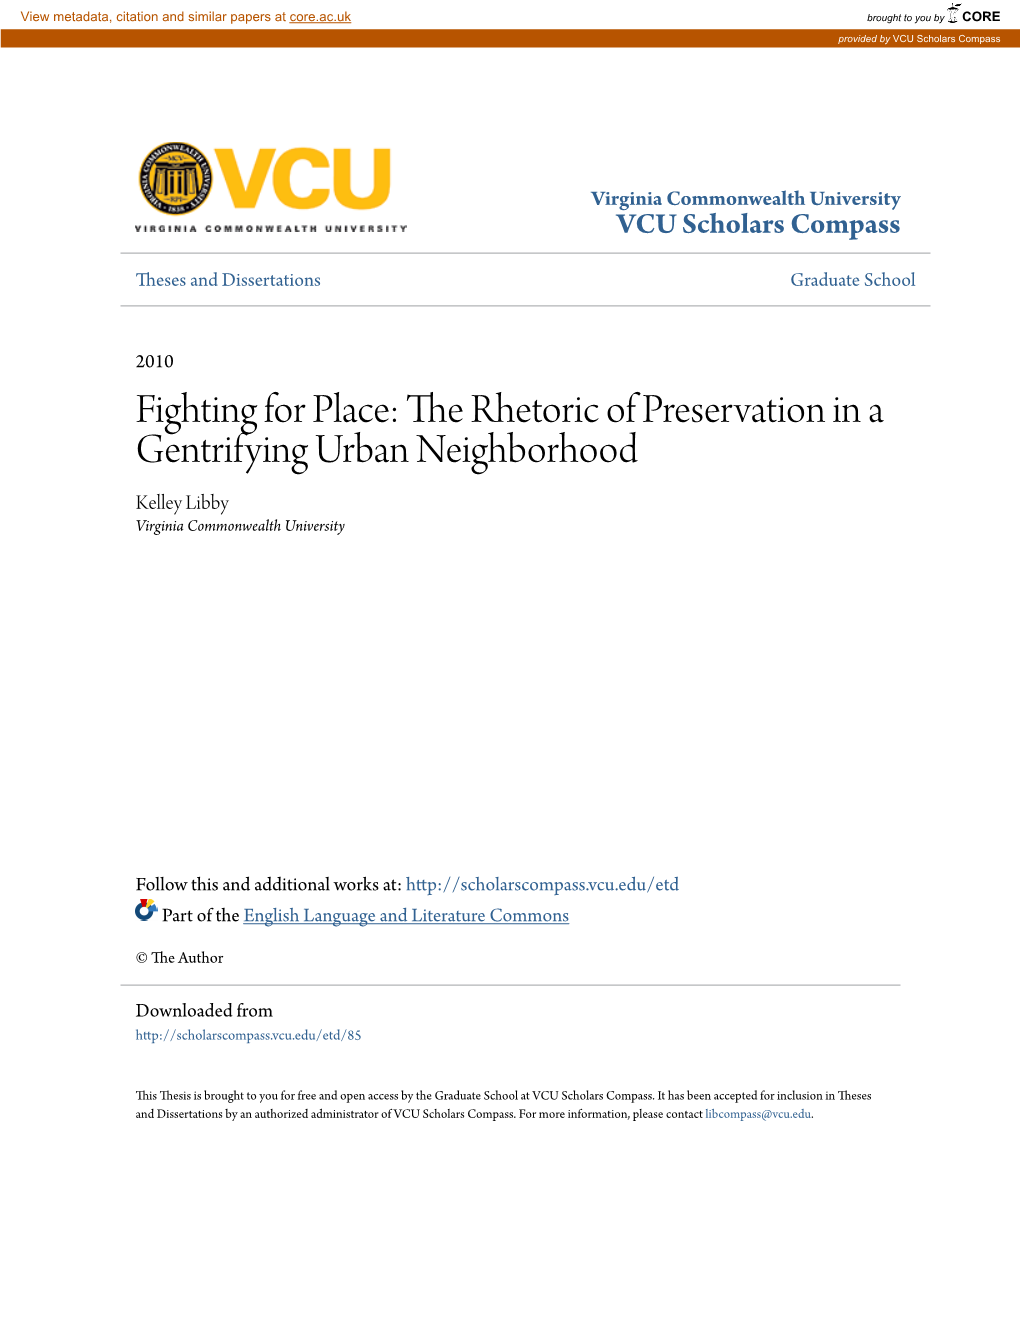 Fighting for Place: the Rhetoric of Preservation in a Gentrifying Urban Neighborhood Kelley Libby Virginia Commonwealth University